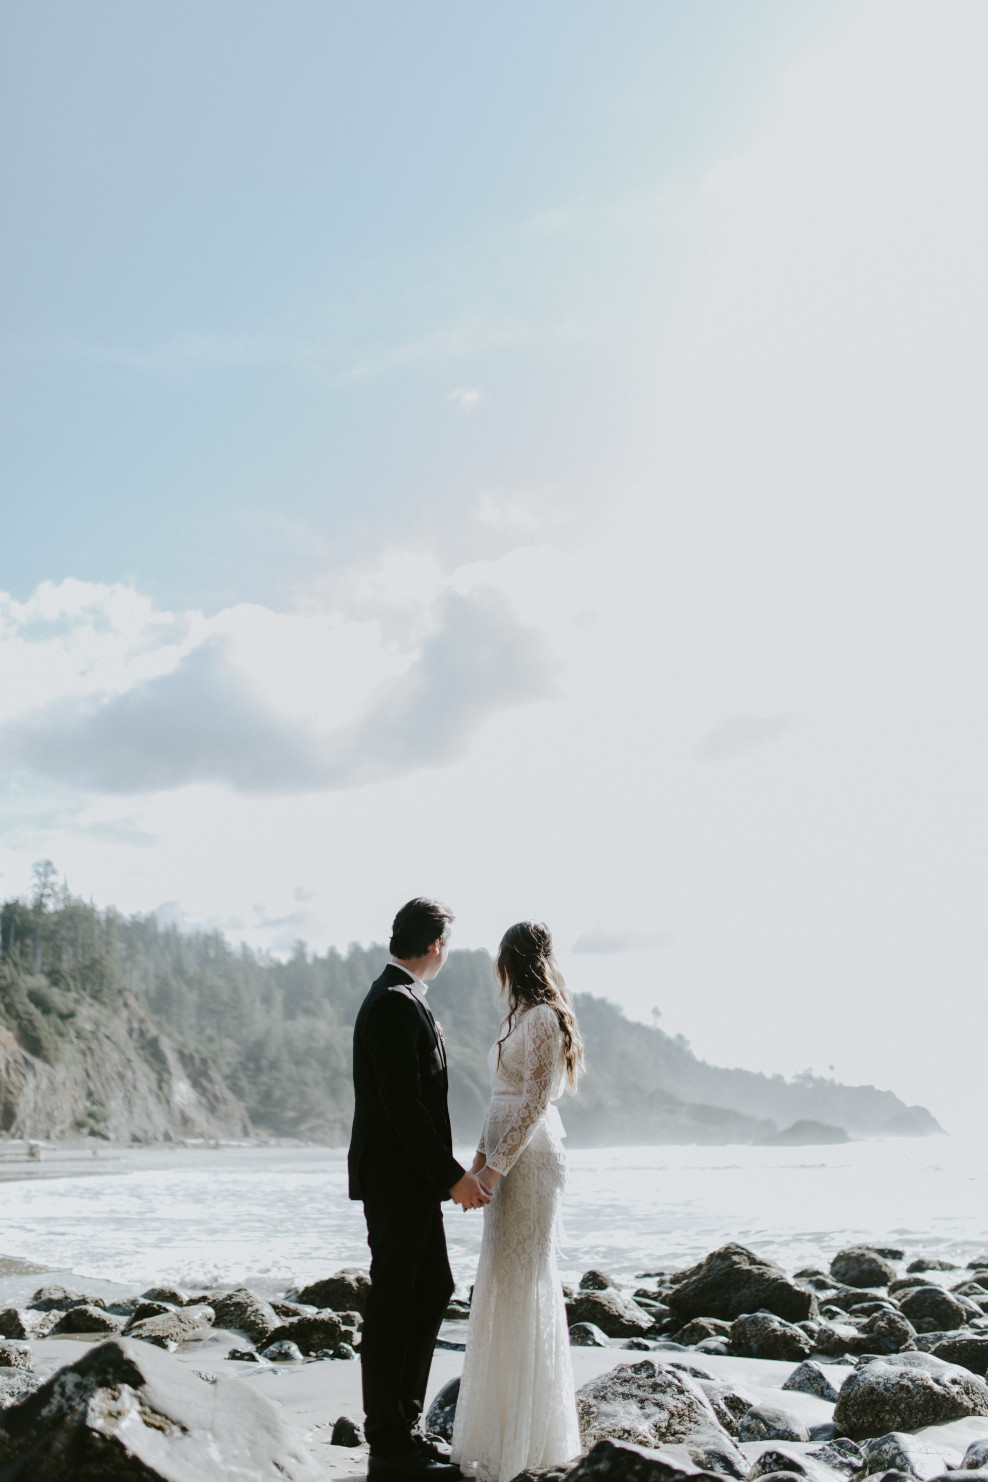 Nicole and Vlad laughing at the beach. Elopement wedding photography at Cannon Beach by Sienna Plus Josh.